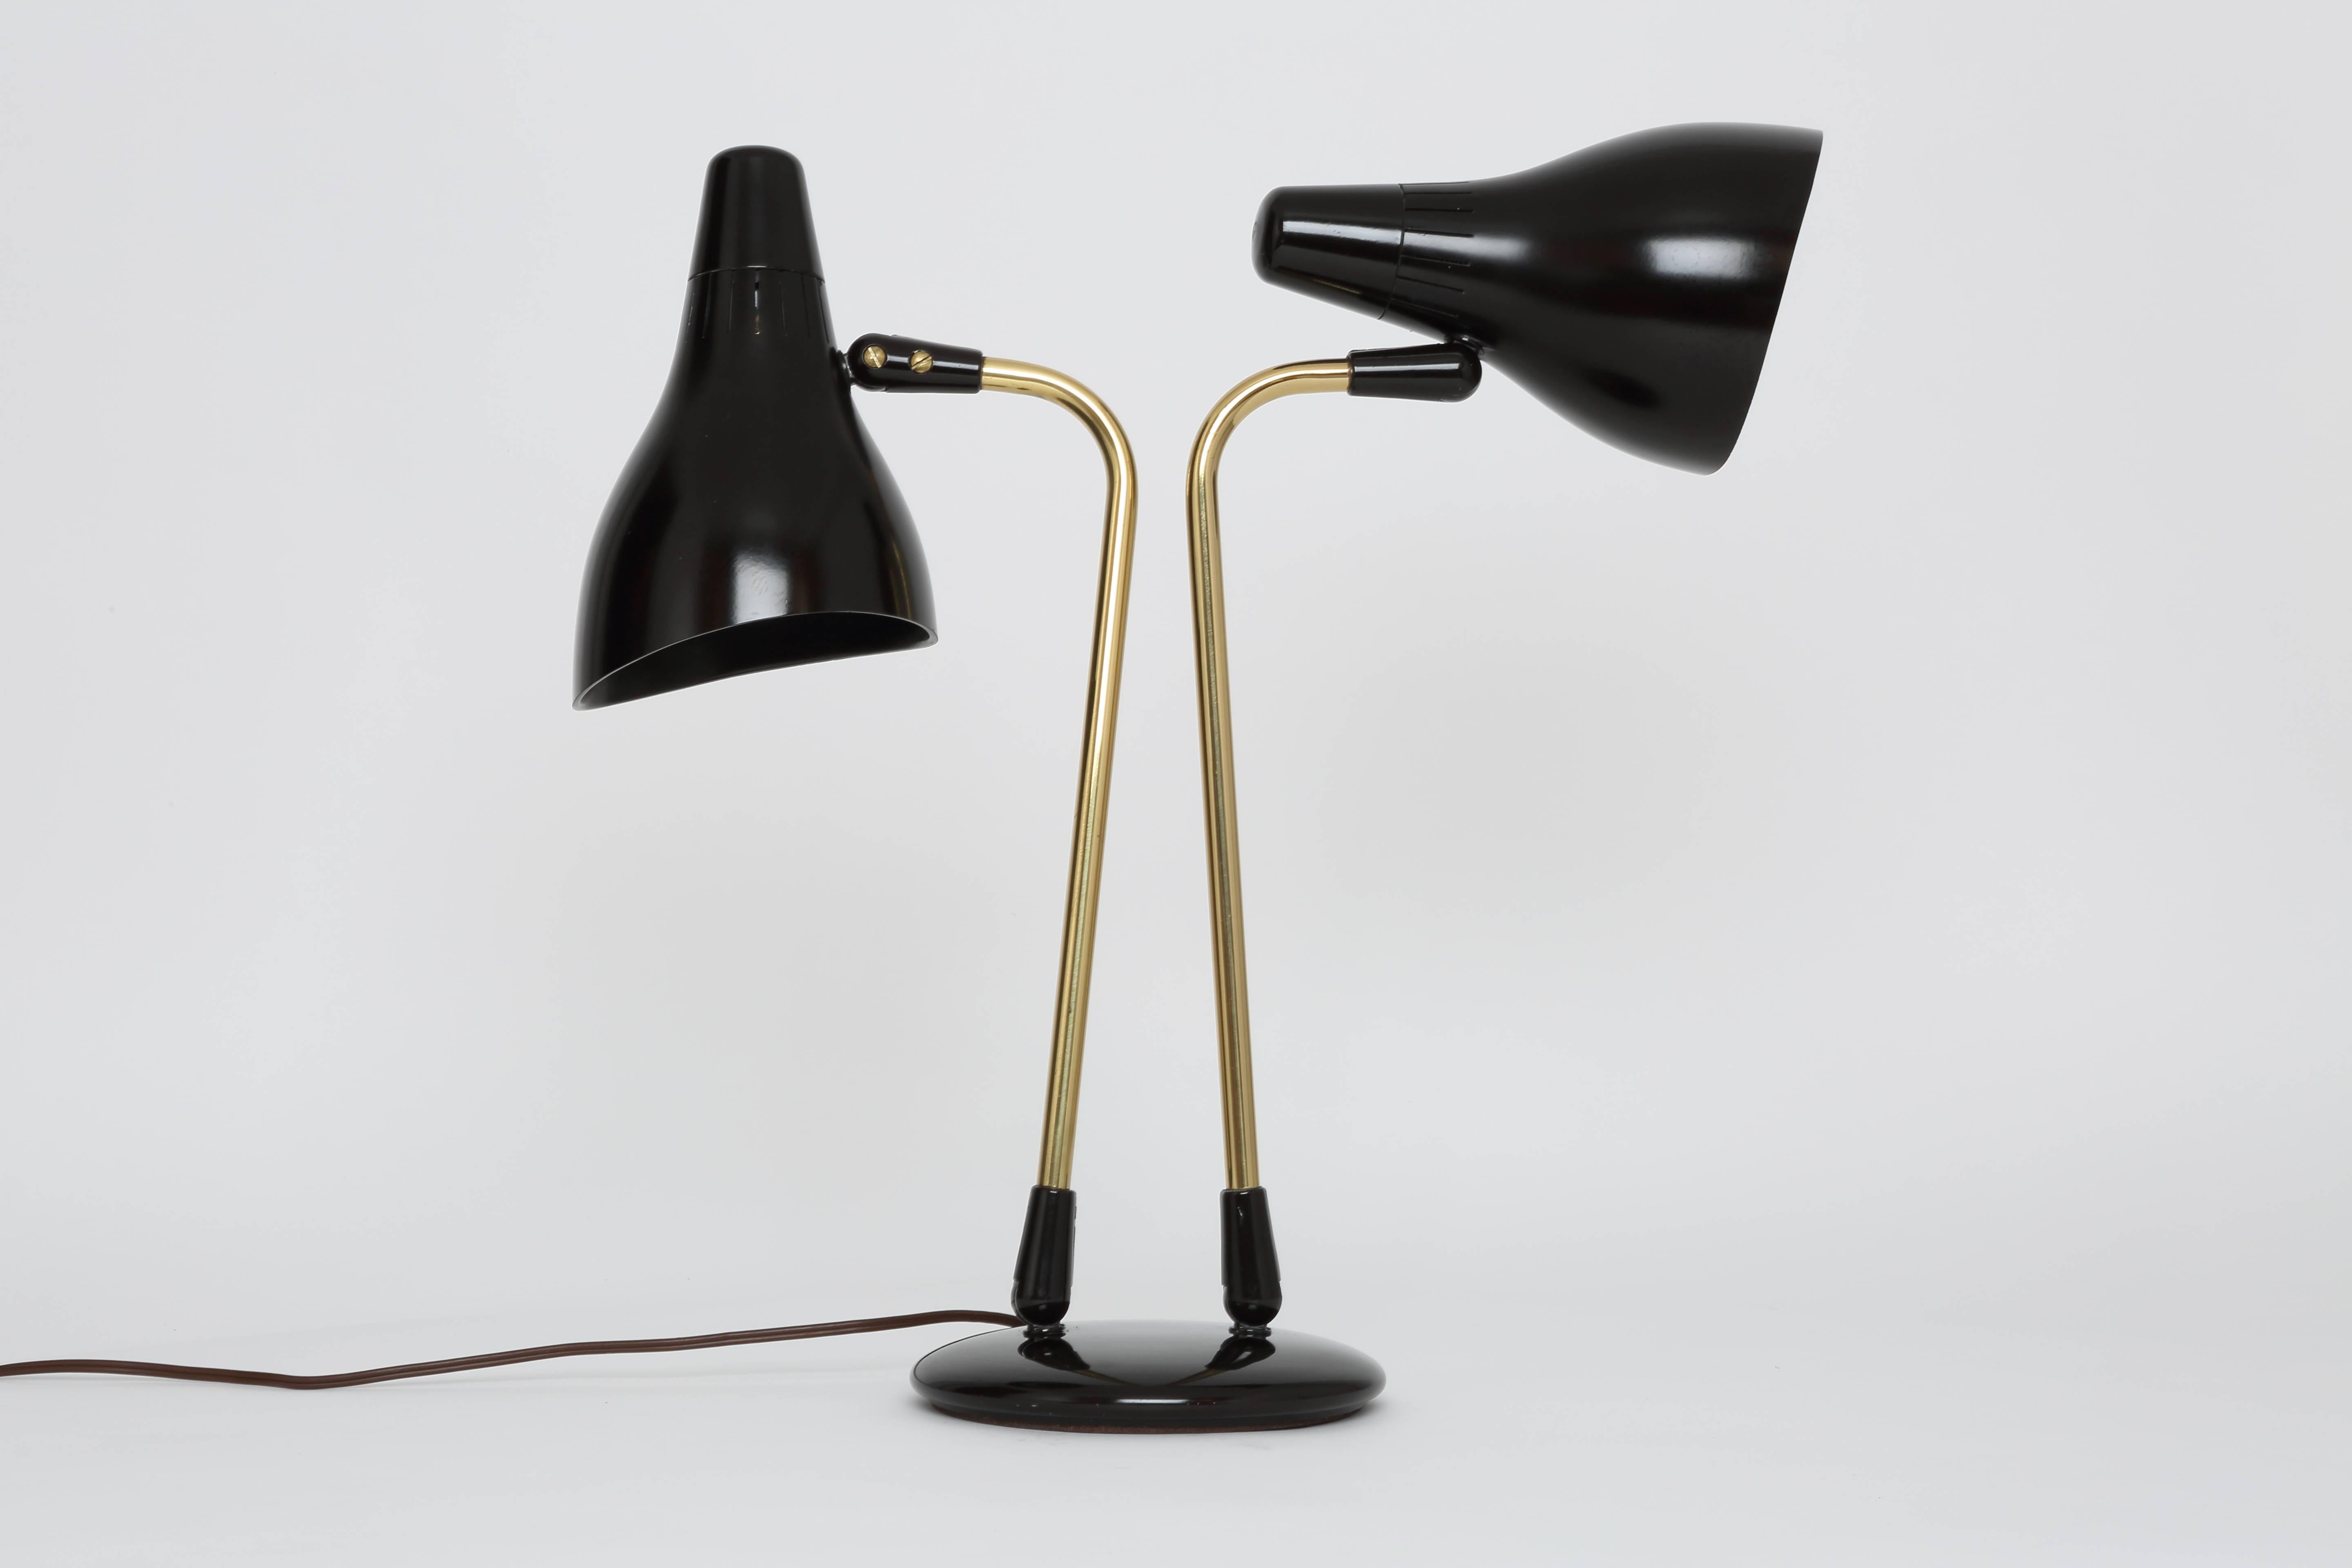 Gerald Thurston desk lamp for Lightolier.
Made in USA in 1950s.
Plastic and brass.